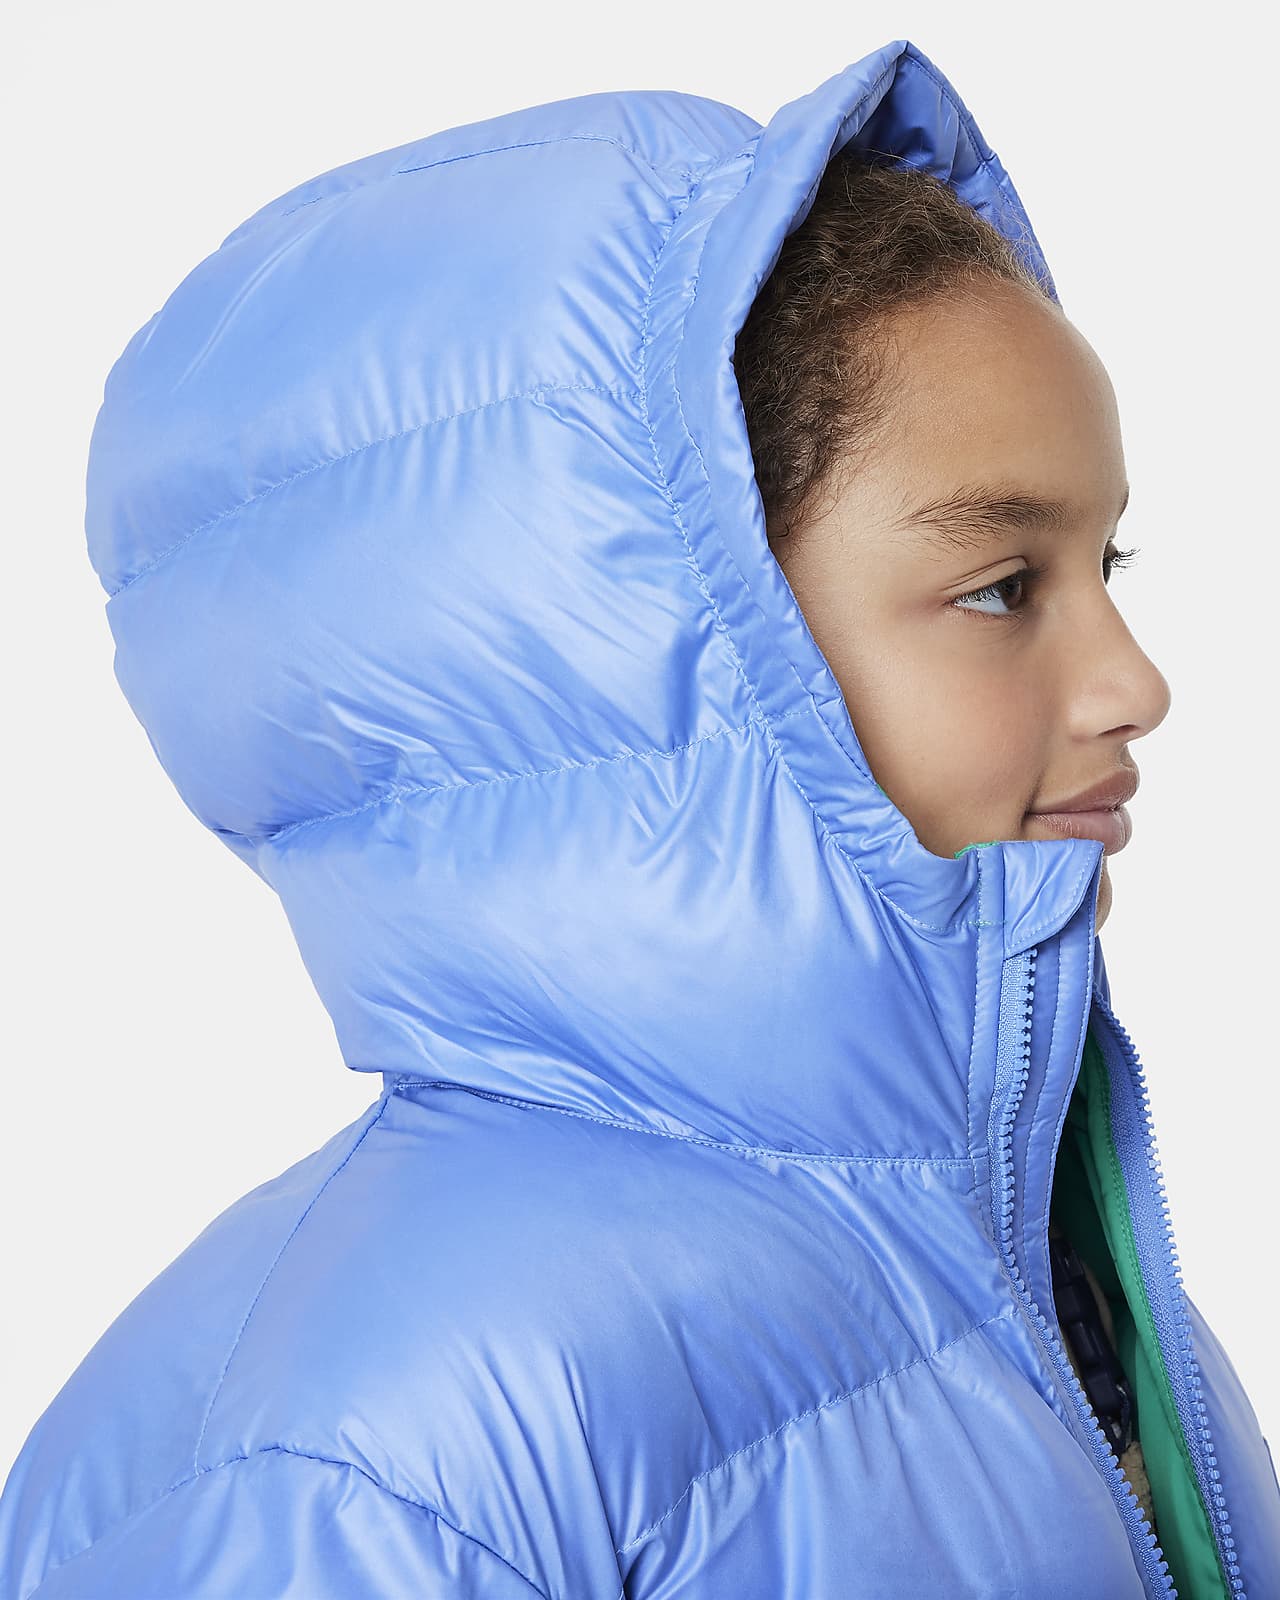 Nike Sportswear Heavyweight Synthetic Fill Big Kids\' Parka. Repel Loose Therma-FIT EasyOn Hooded